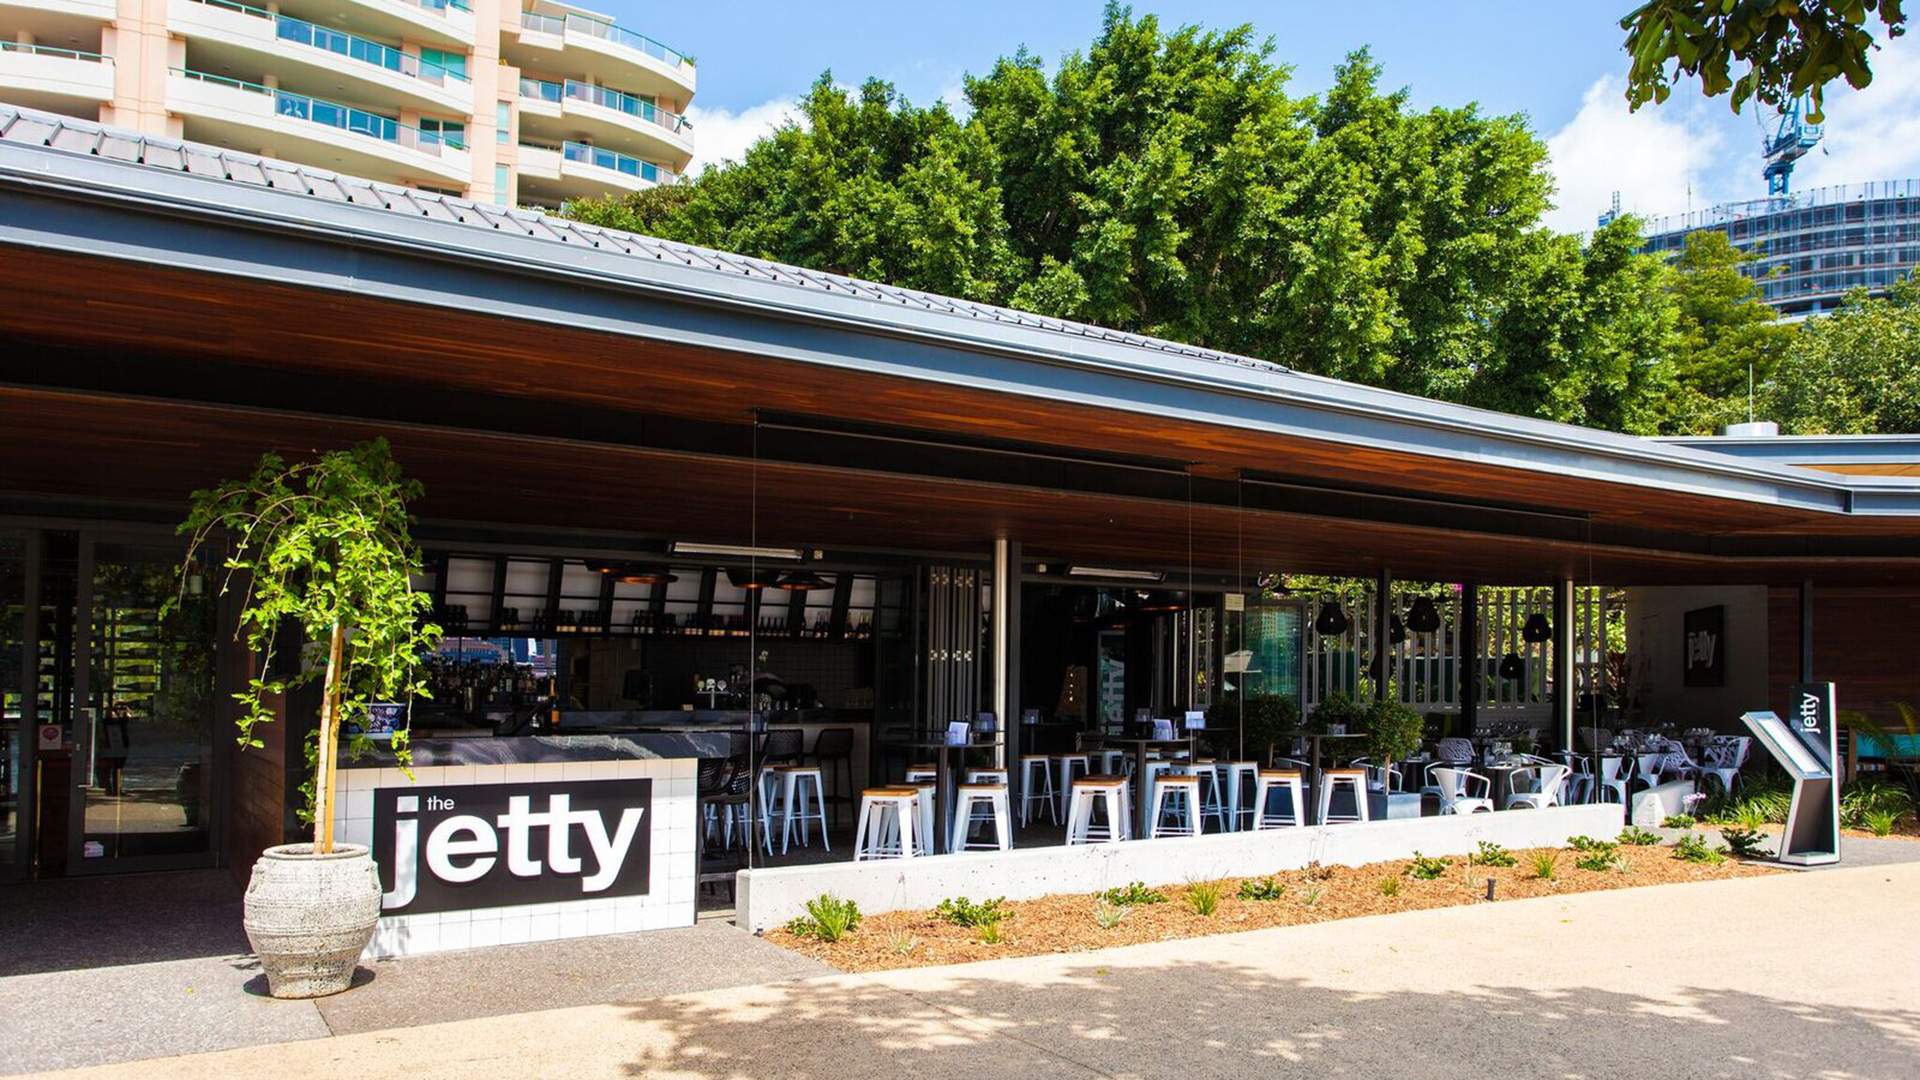 A Look Inside The Jetty South Bank's Riverside Revamp